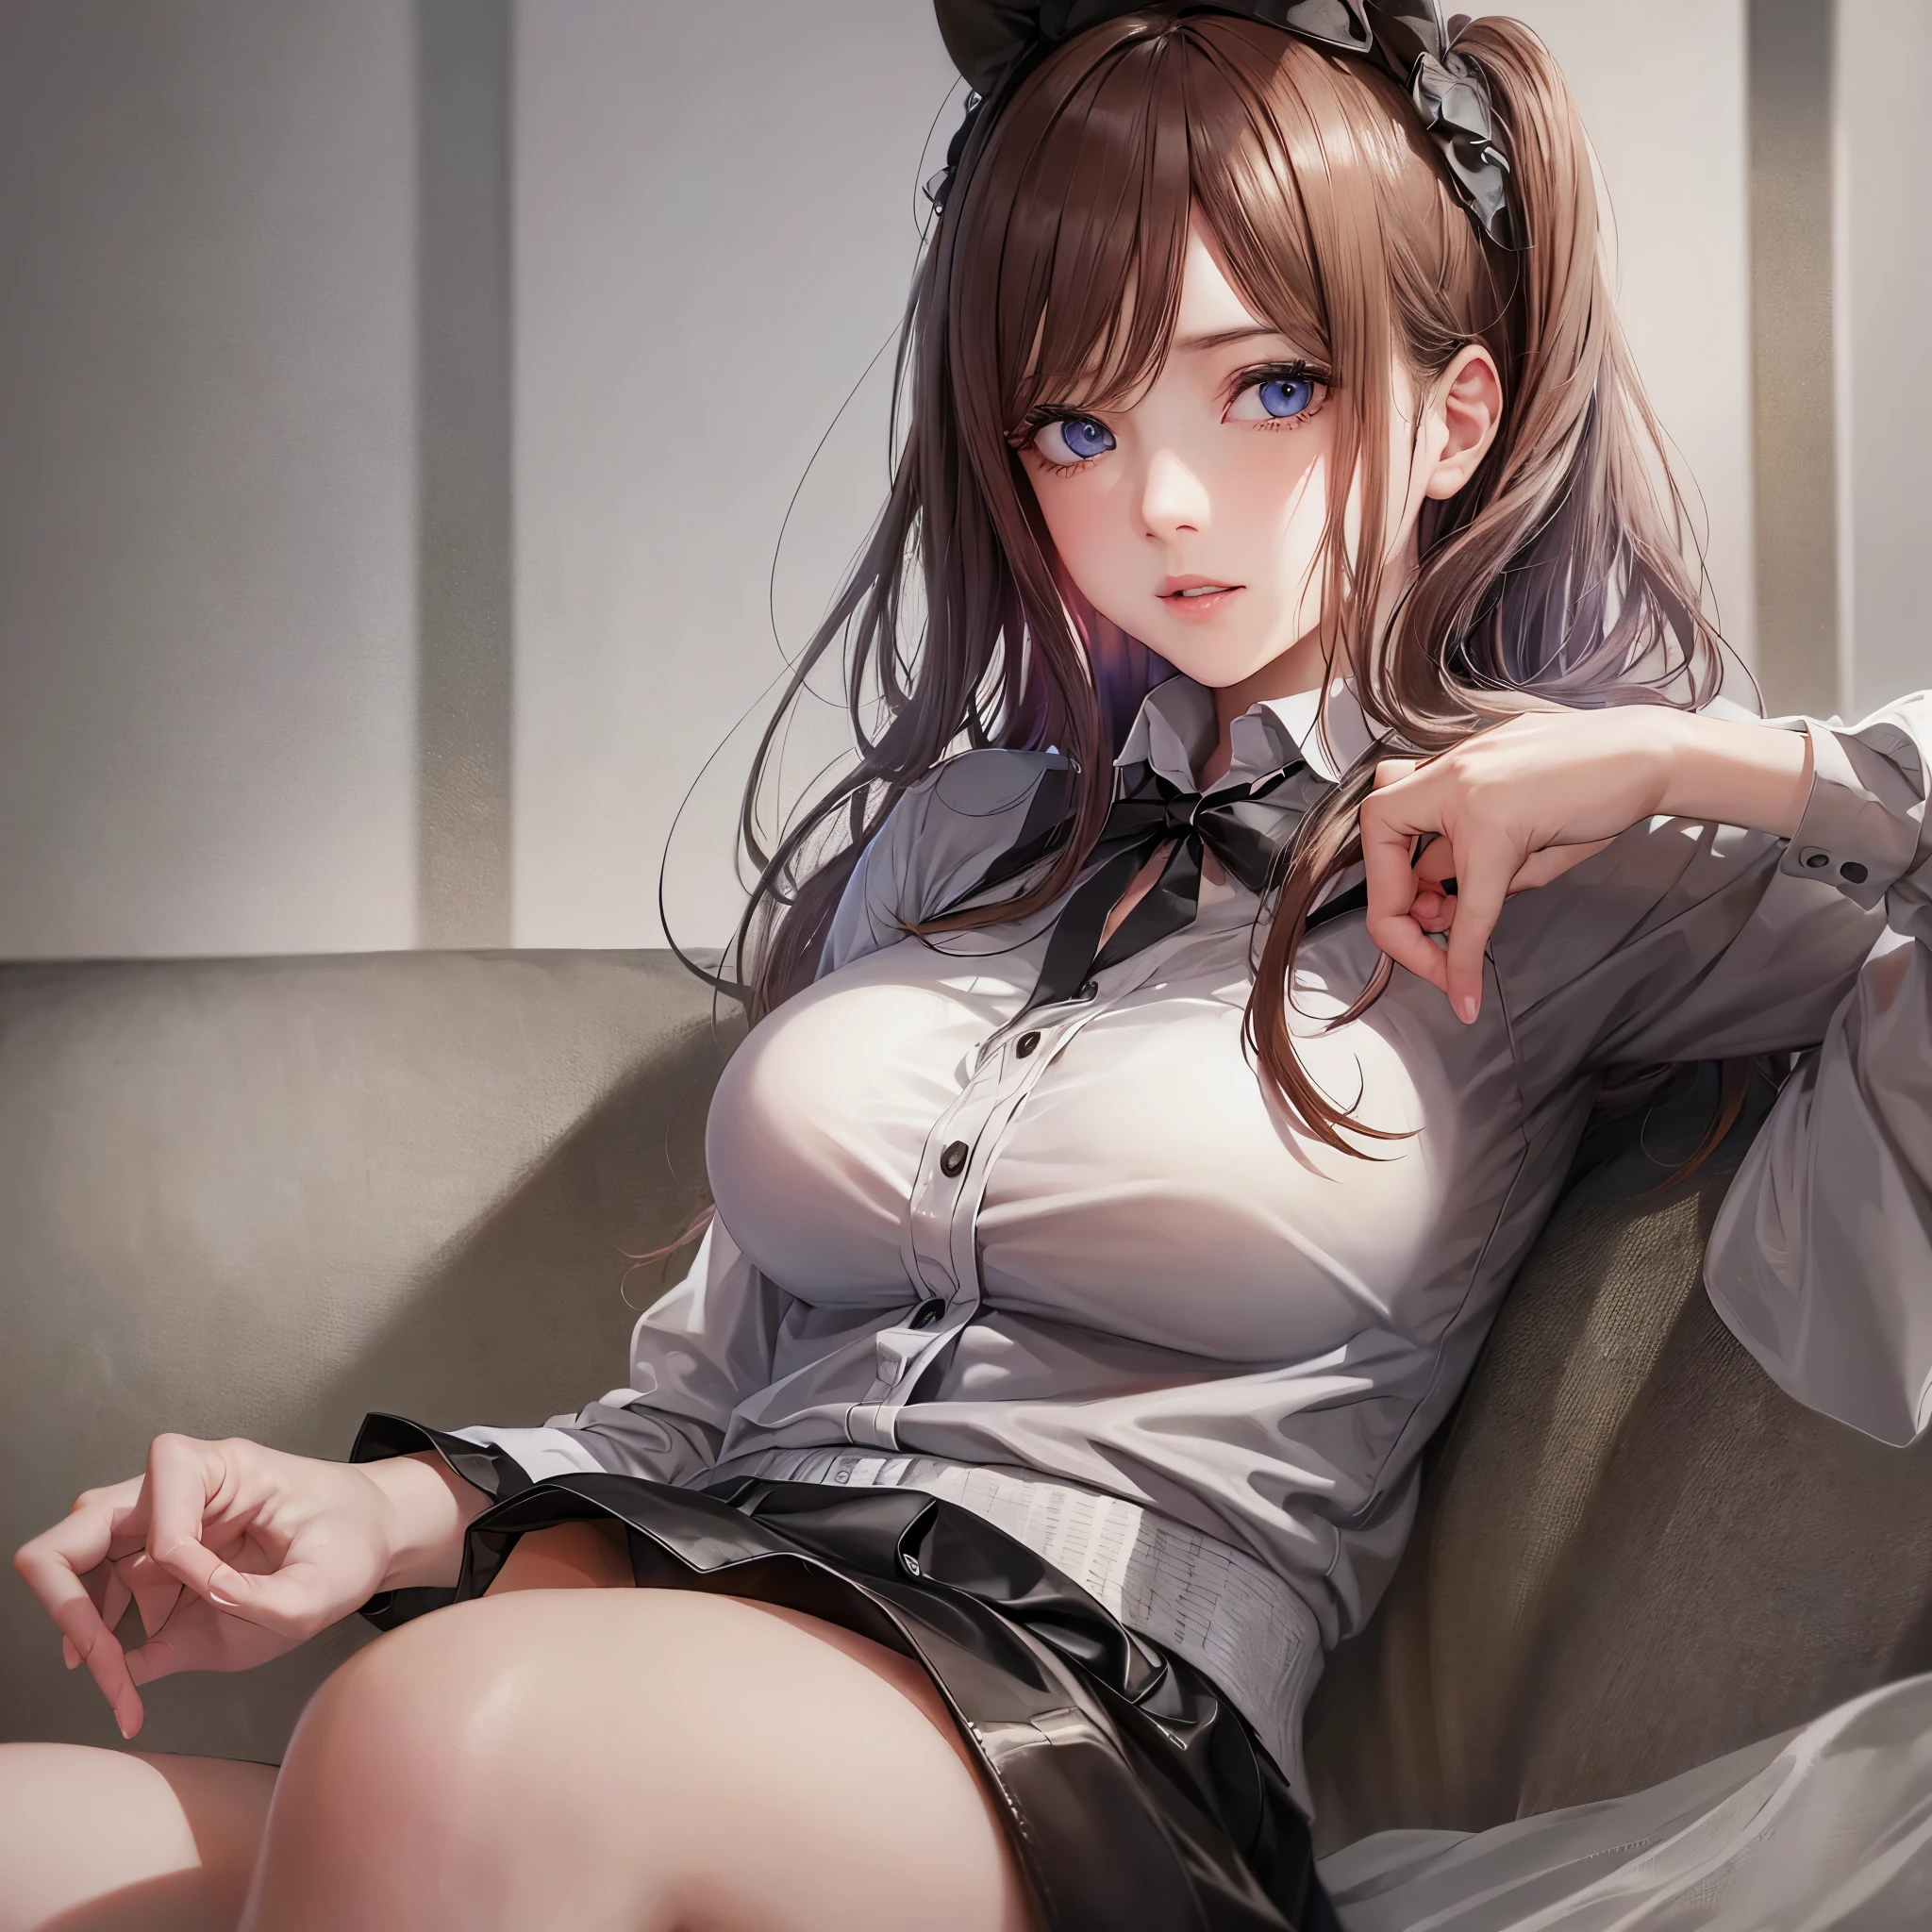 (best quality:1.2,masterpiece:1.2),solely,1girl,serious,beautiful detailed eyes,beautiful detailed lips,extremely detailed eyes and face,long eyelashes,Miku Nakano,looking at the viewer,hand on face,sitting,crossed legs,button-up shirt,tied-up skirt,stockings,thick thighs,big breasts,illustration,ultra-detailed,realistic:1.37,professional,portrait,vivid colors,soft lighting